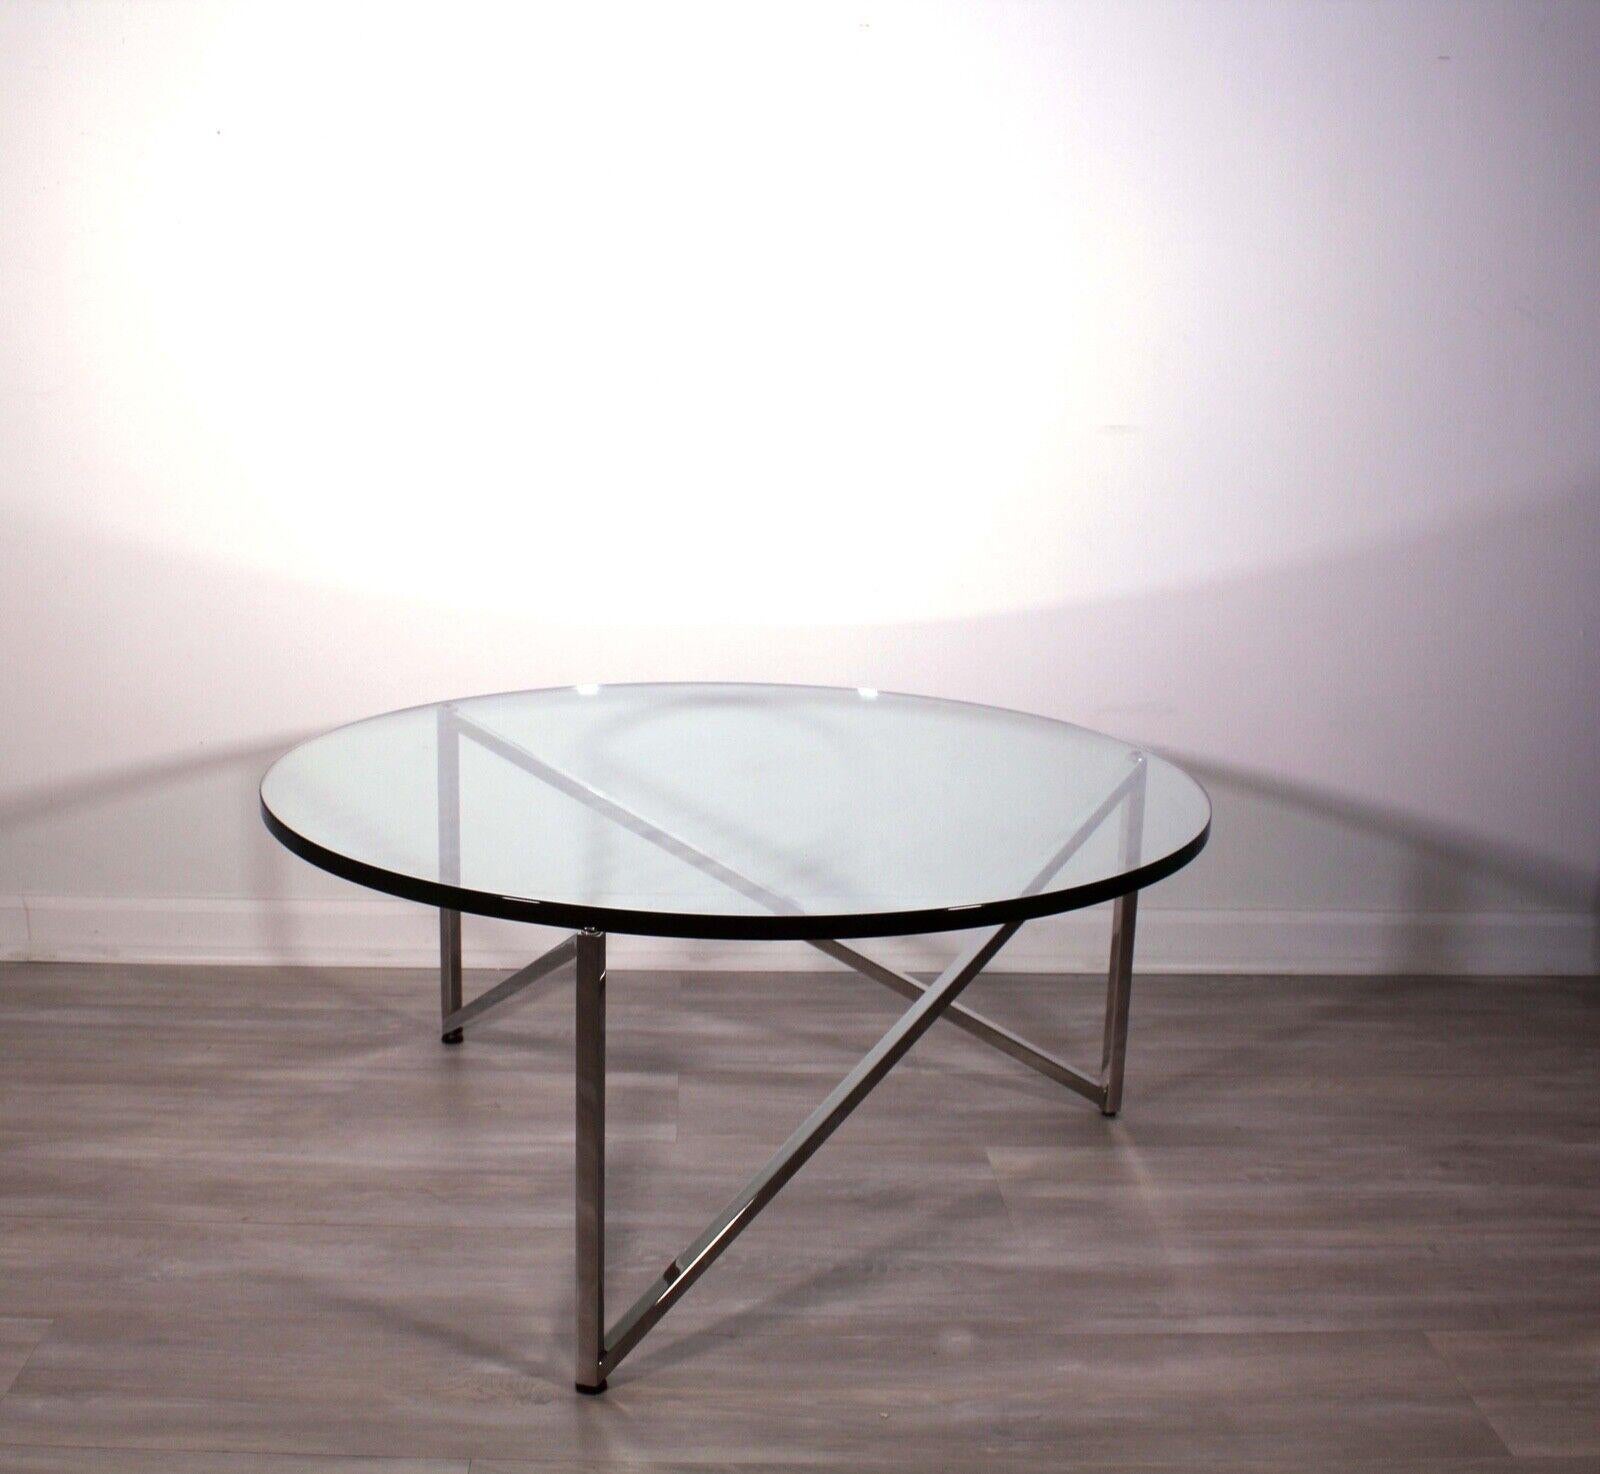 Contemporary Modern Round Glass Coffee Table Polished Stainless Steel Brueton 1